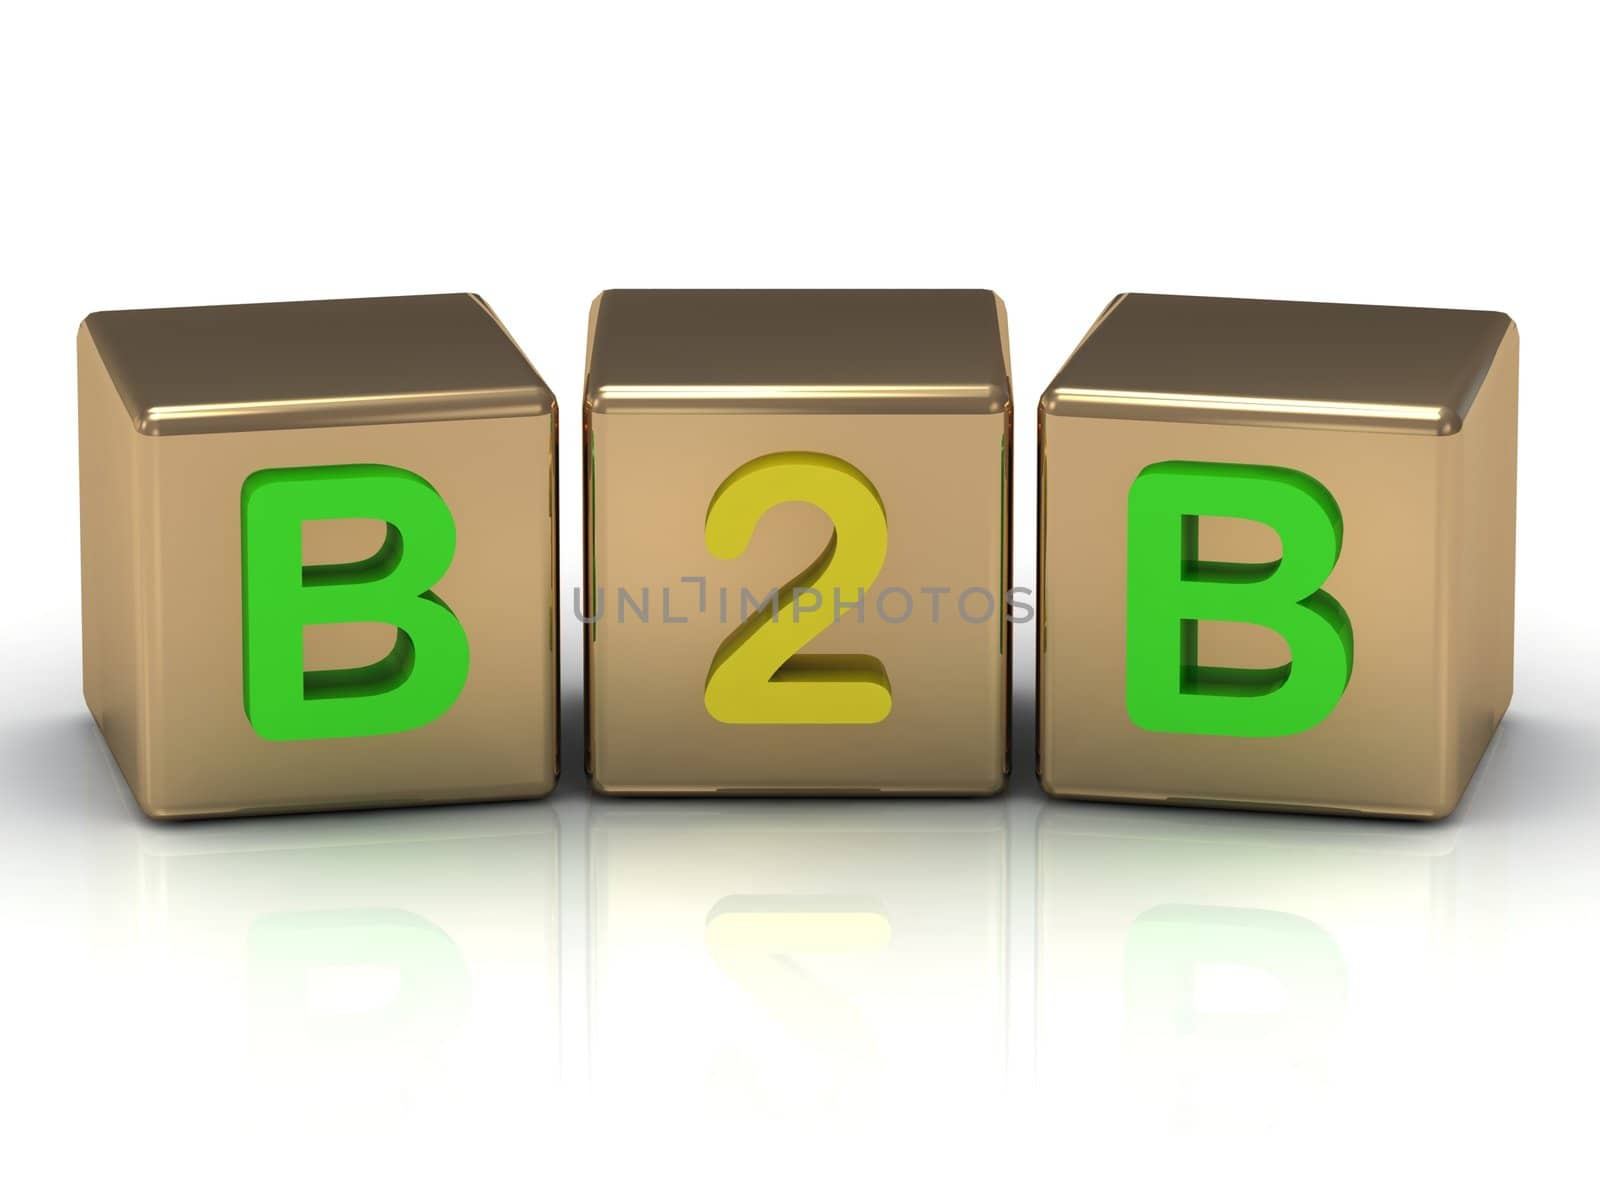 B2B Business-to-Business in building blocks on white background